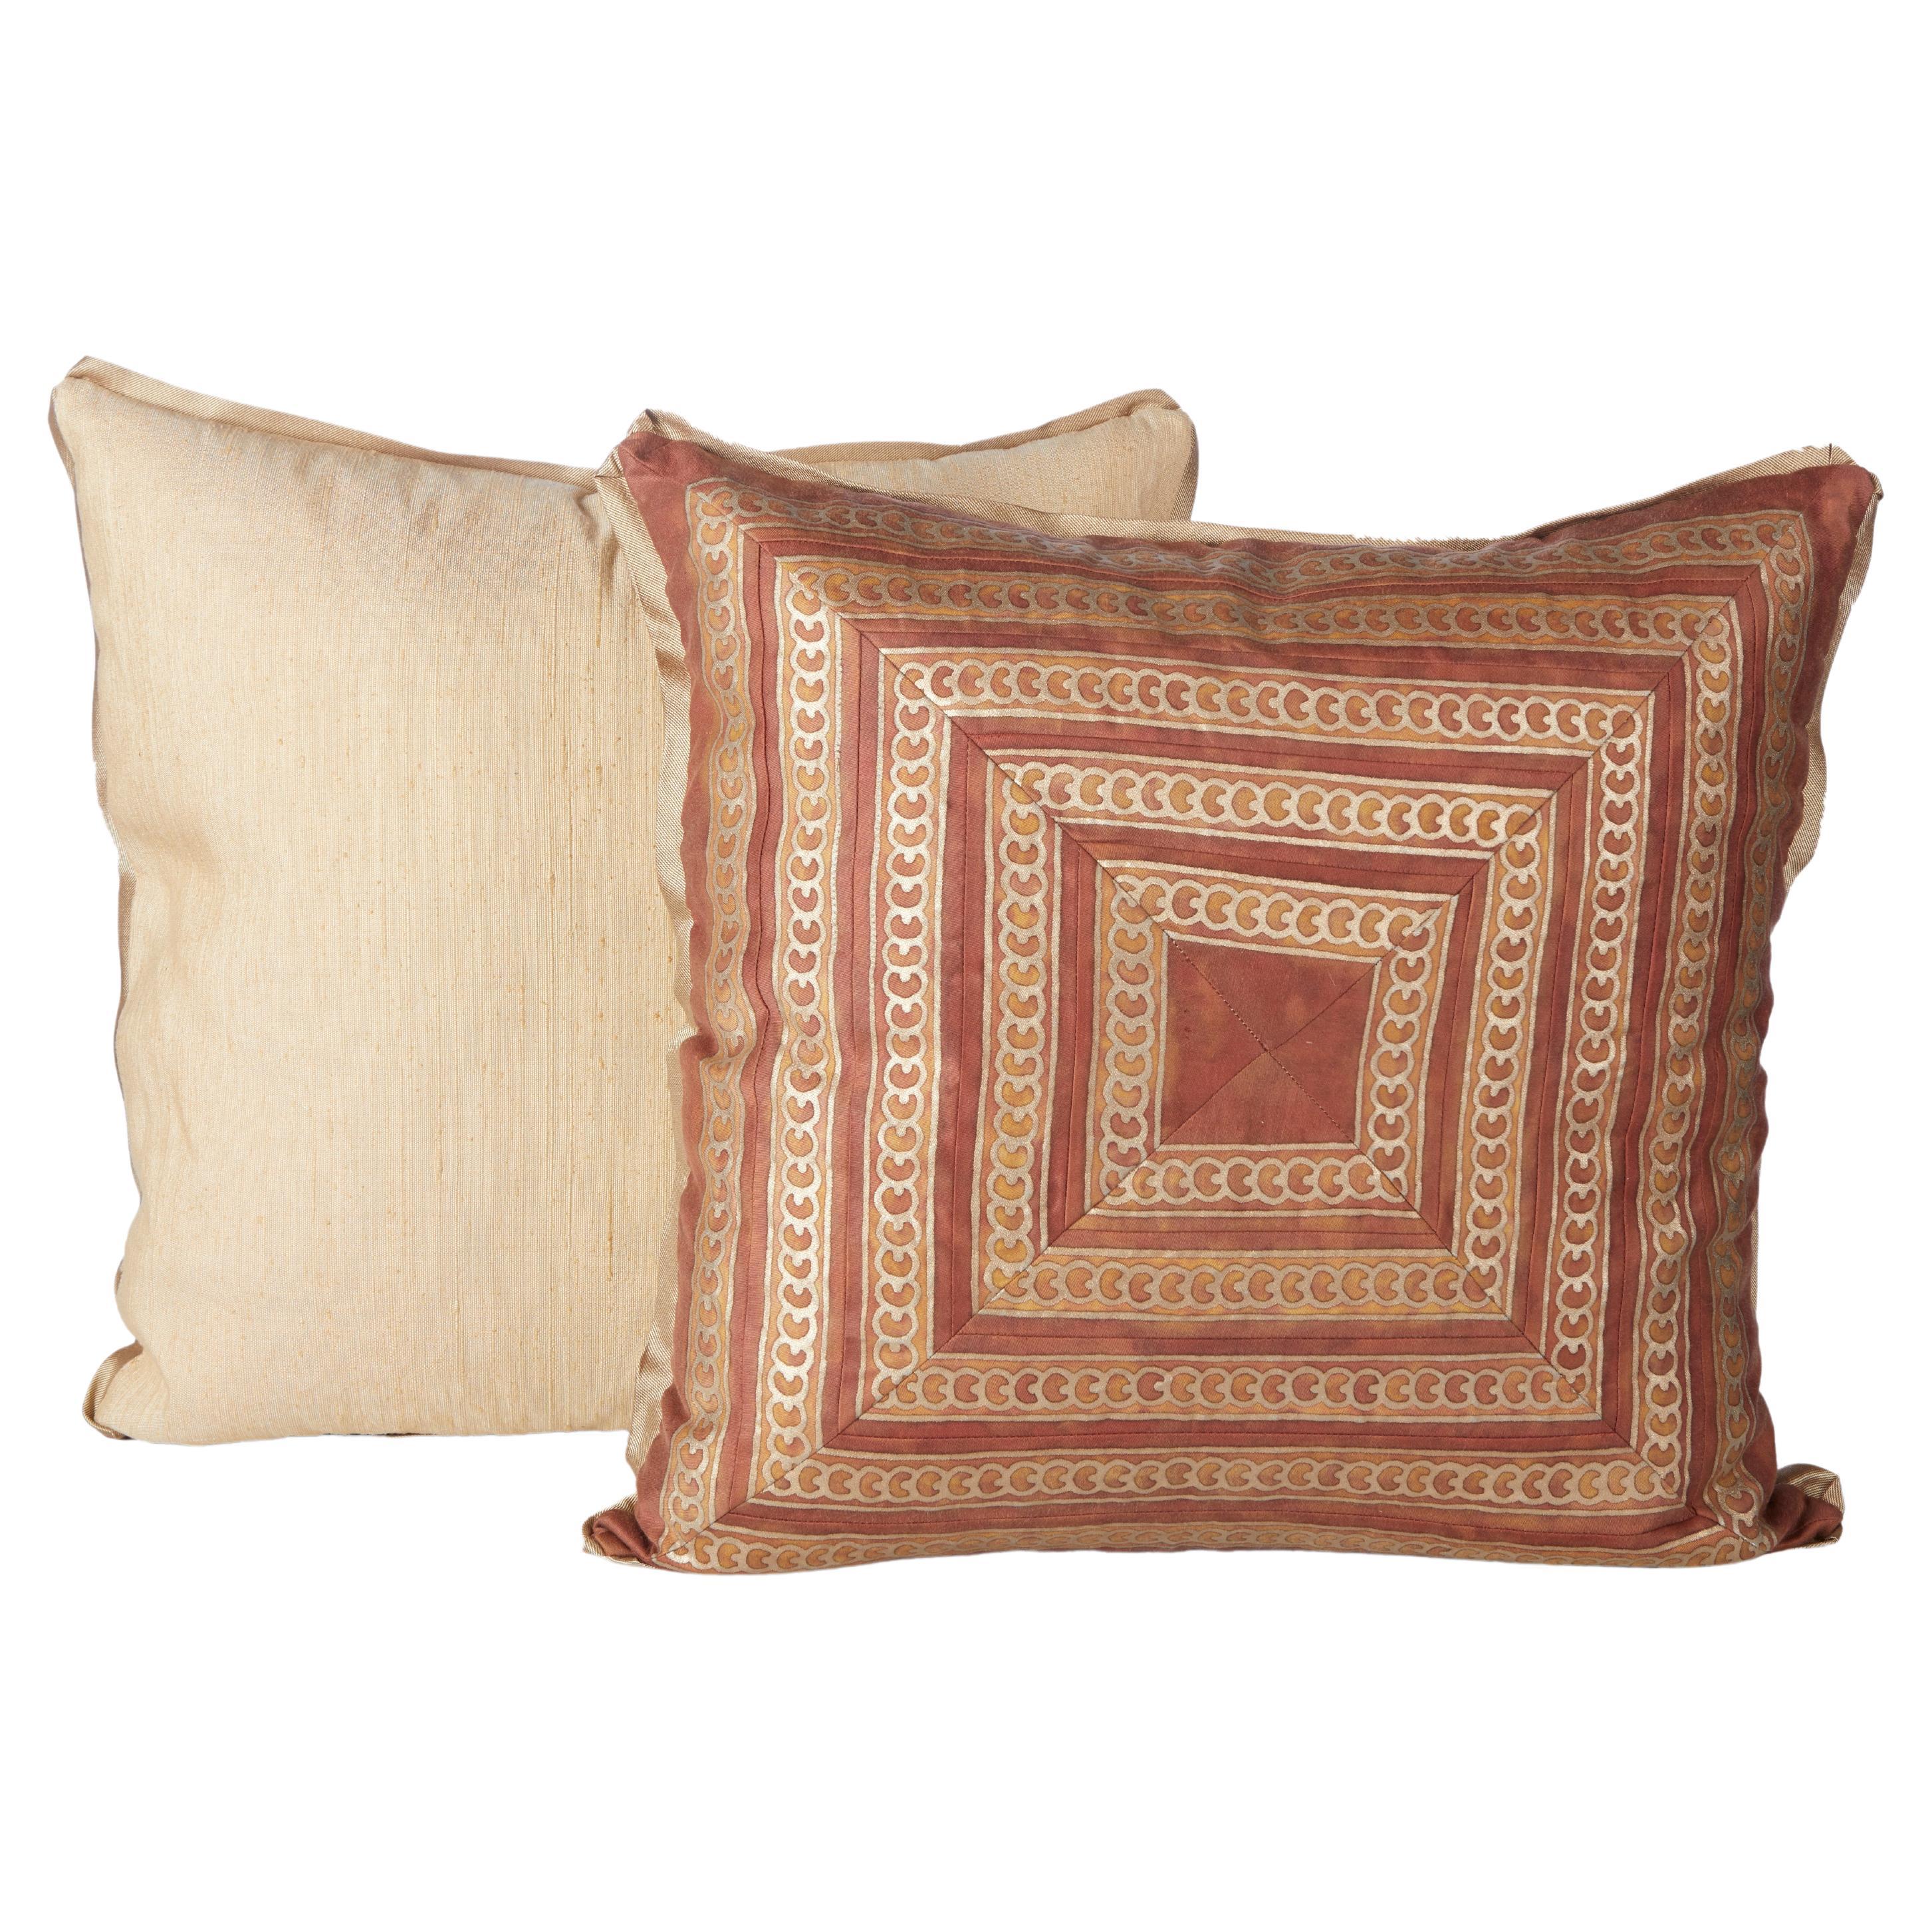 Pair of Fortuny Cushions with Border Pieced and Mitered by David Duncan Studio